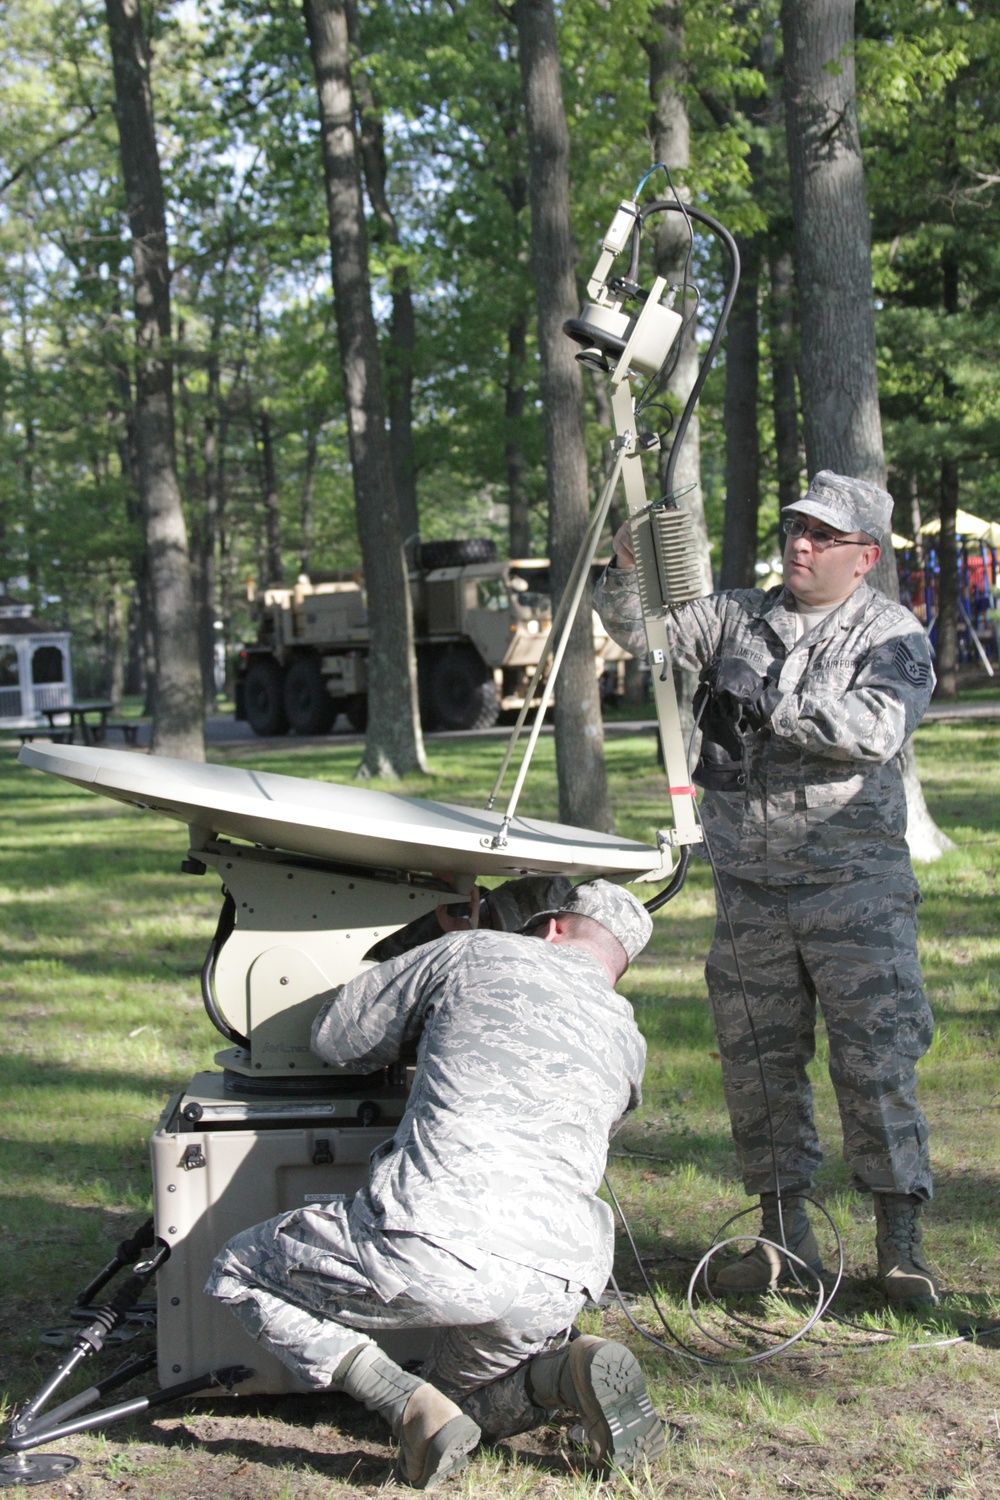 2013 Armed Forces Day at Natick Soldier Systems Center